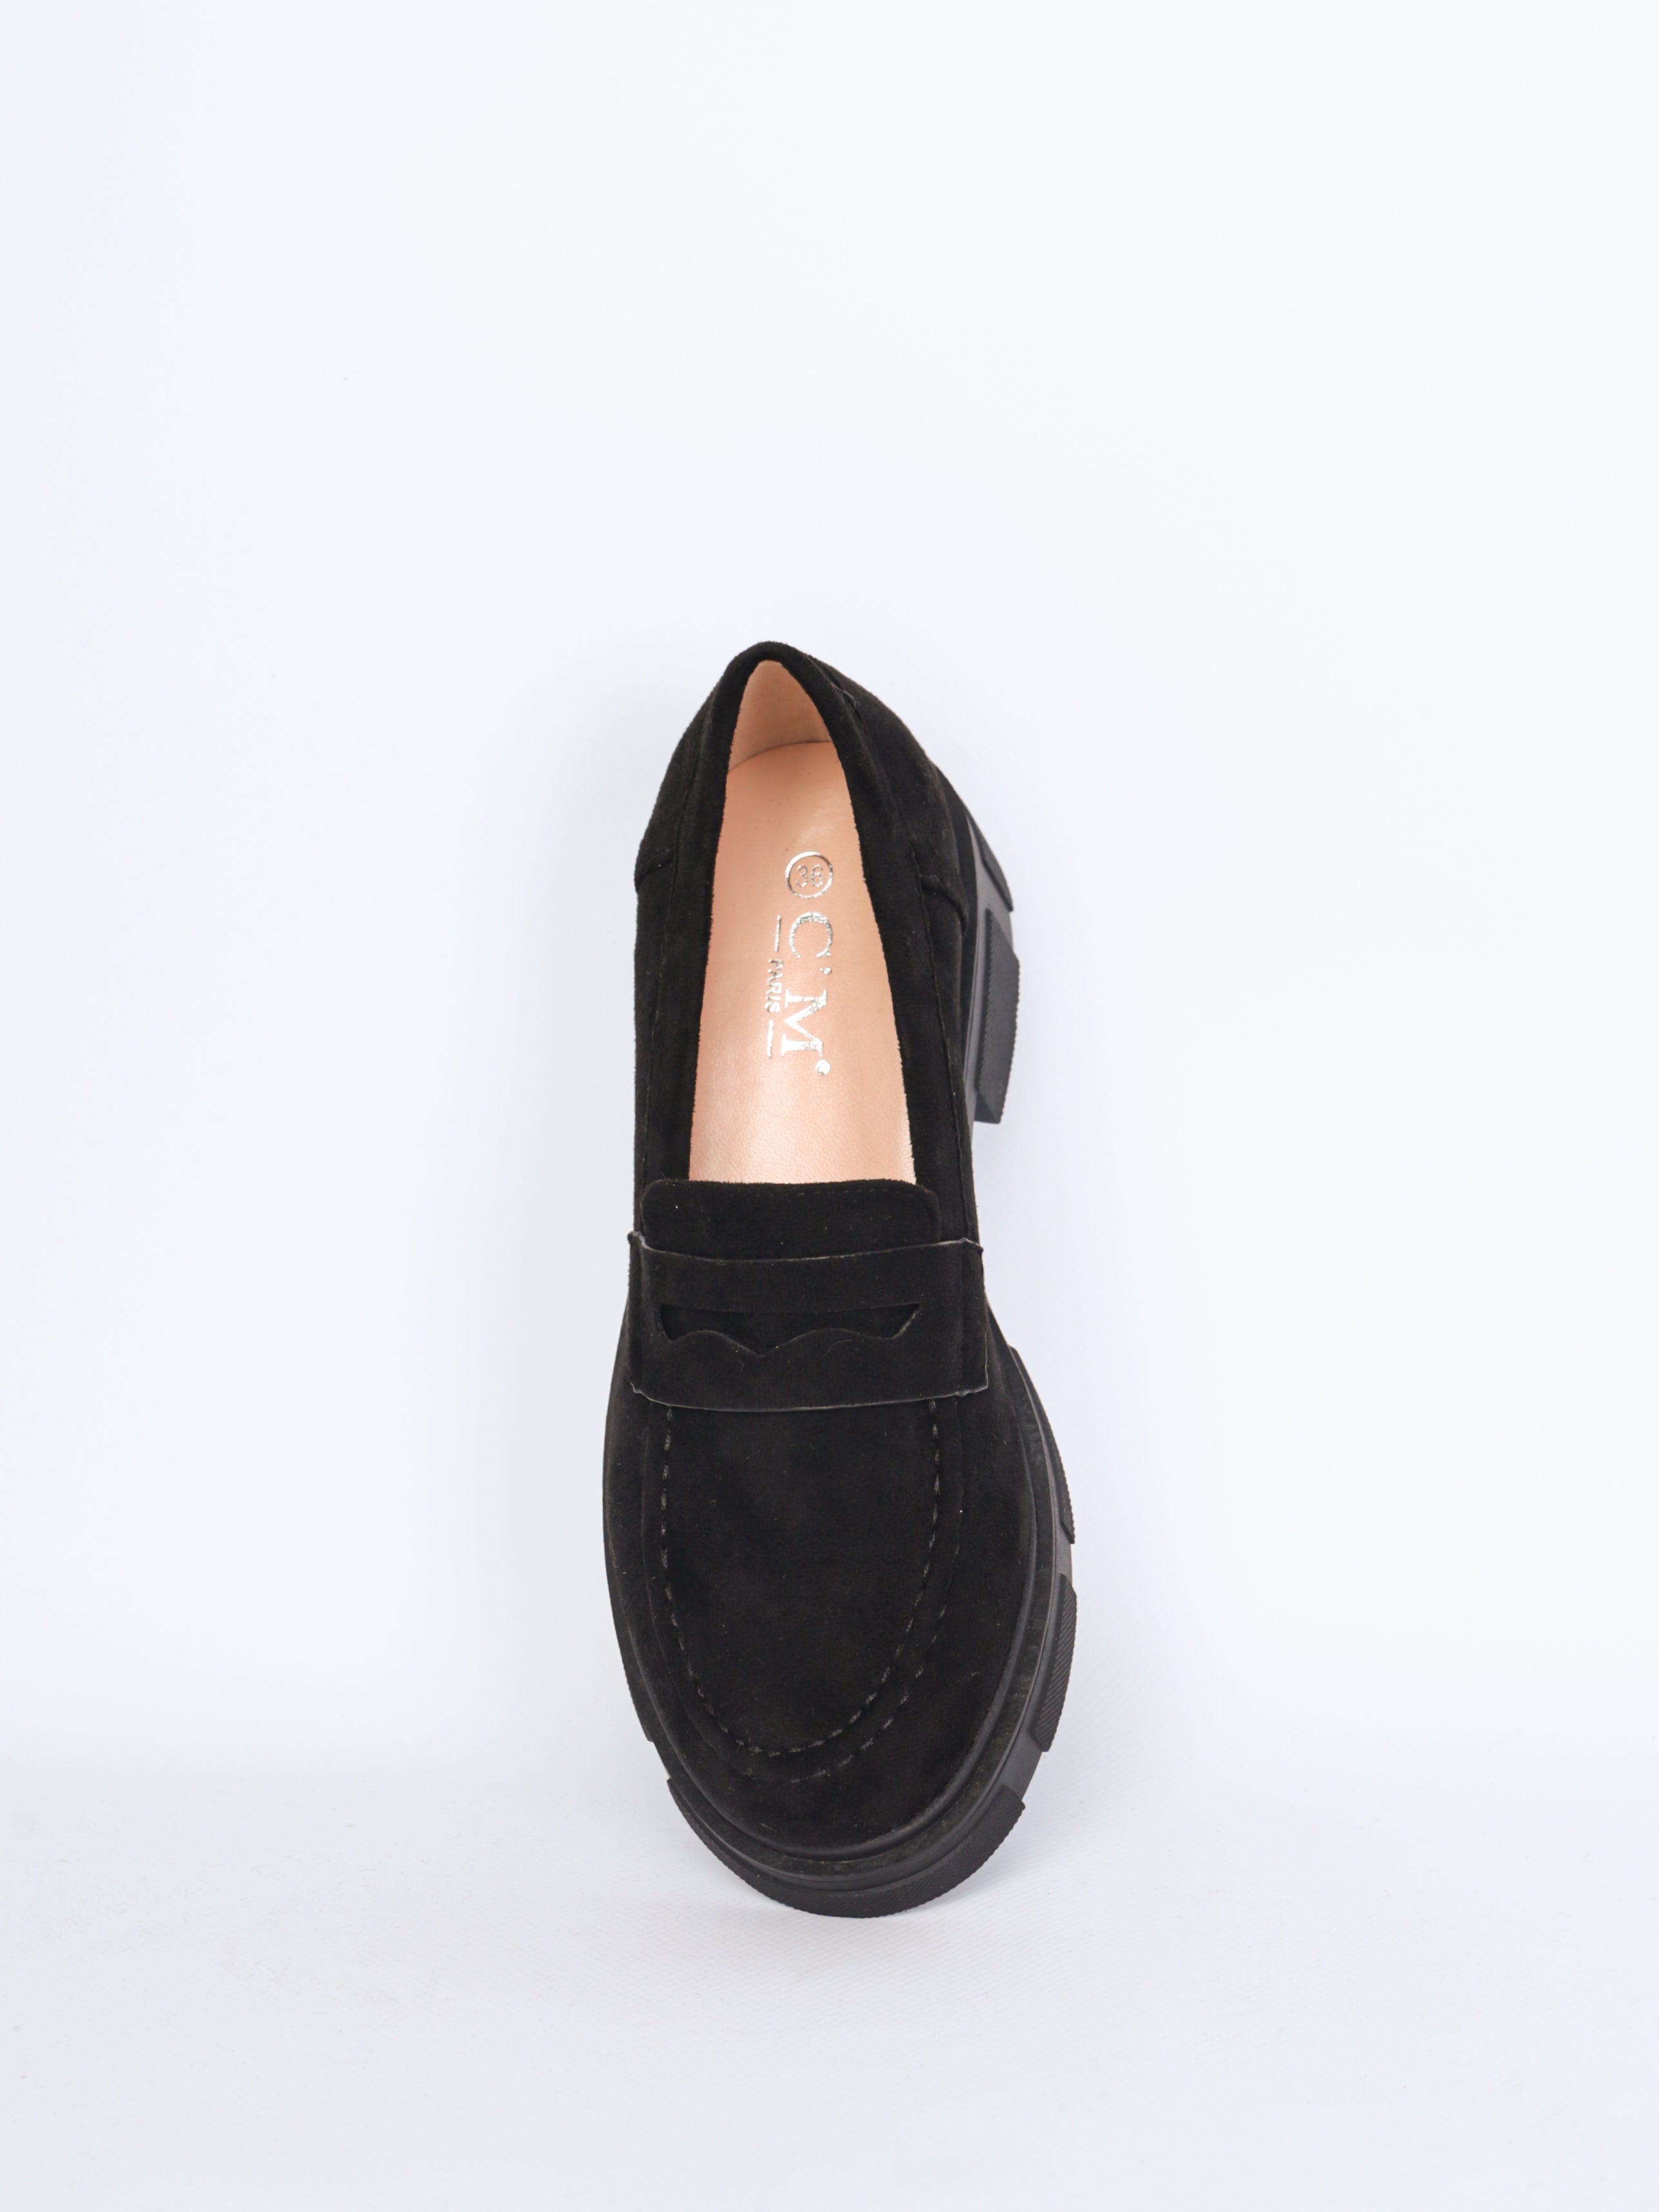 Imitation leather classic loafers